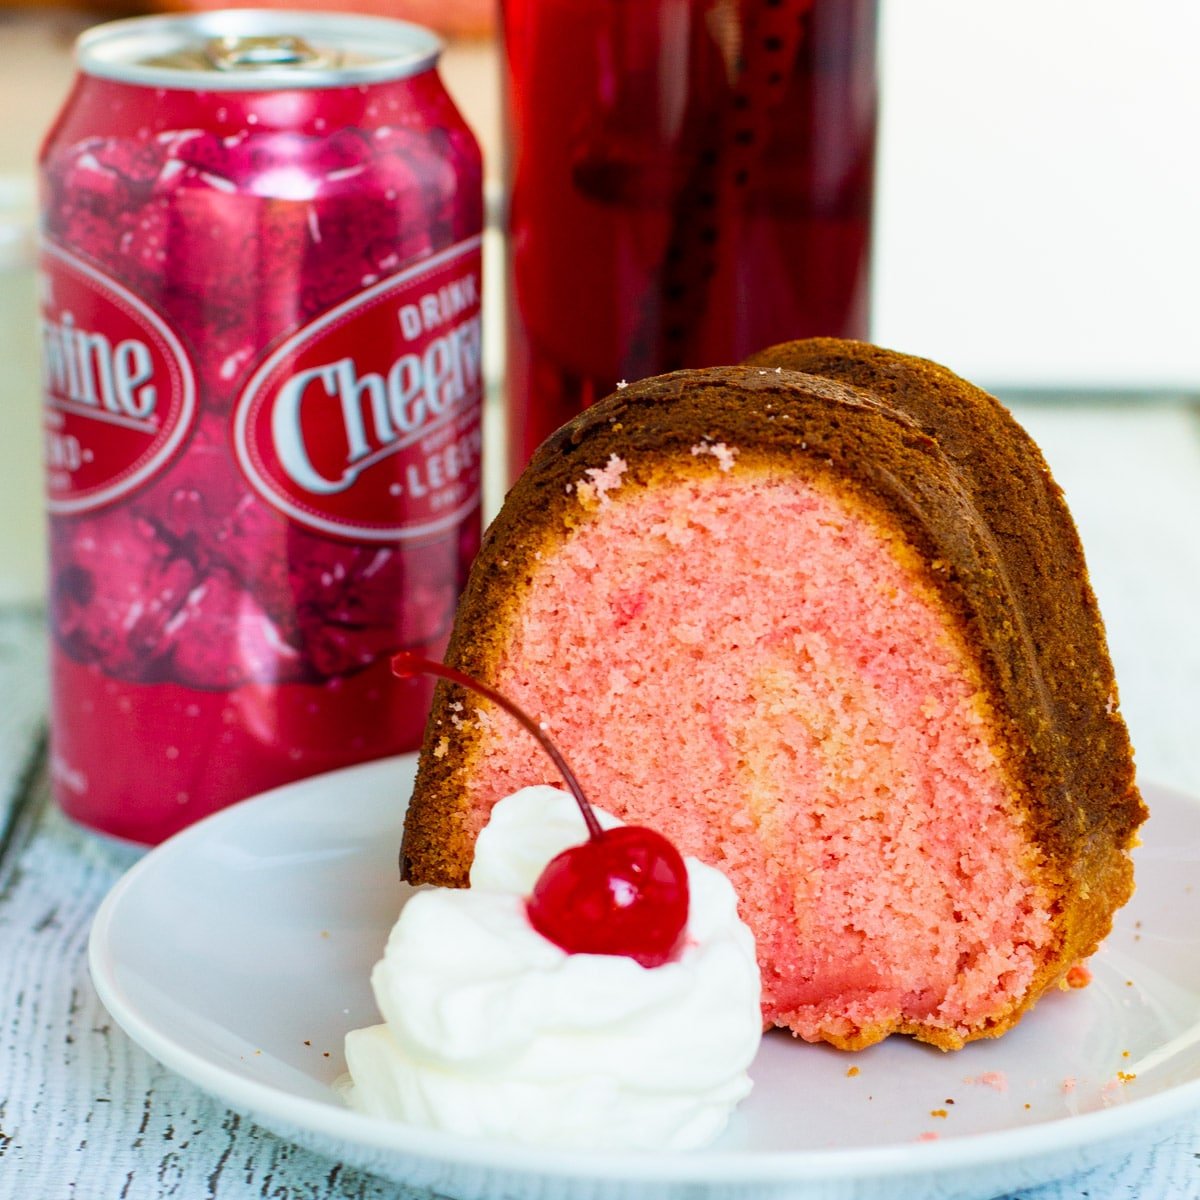 Slice of Cheerwine Bundt Cake on a plate and a can of Cheerwine.